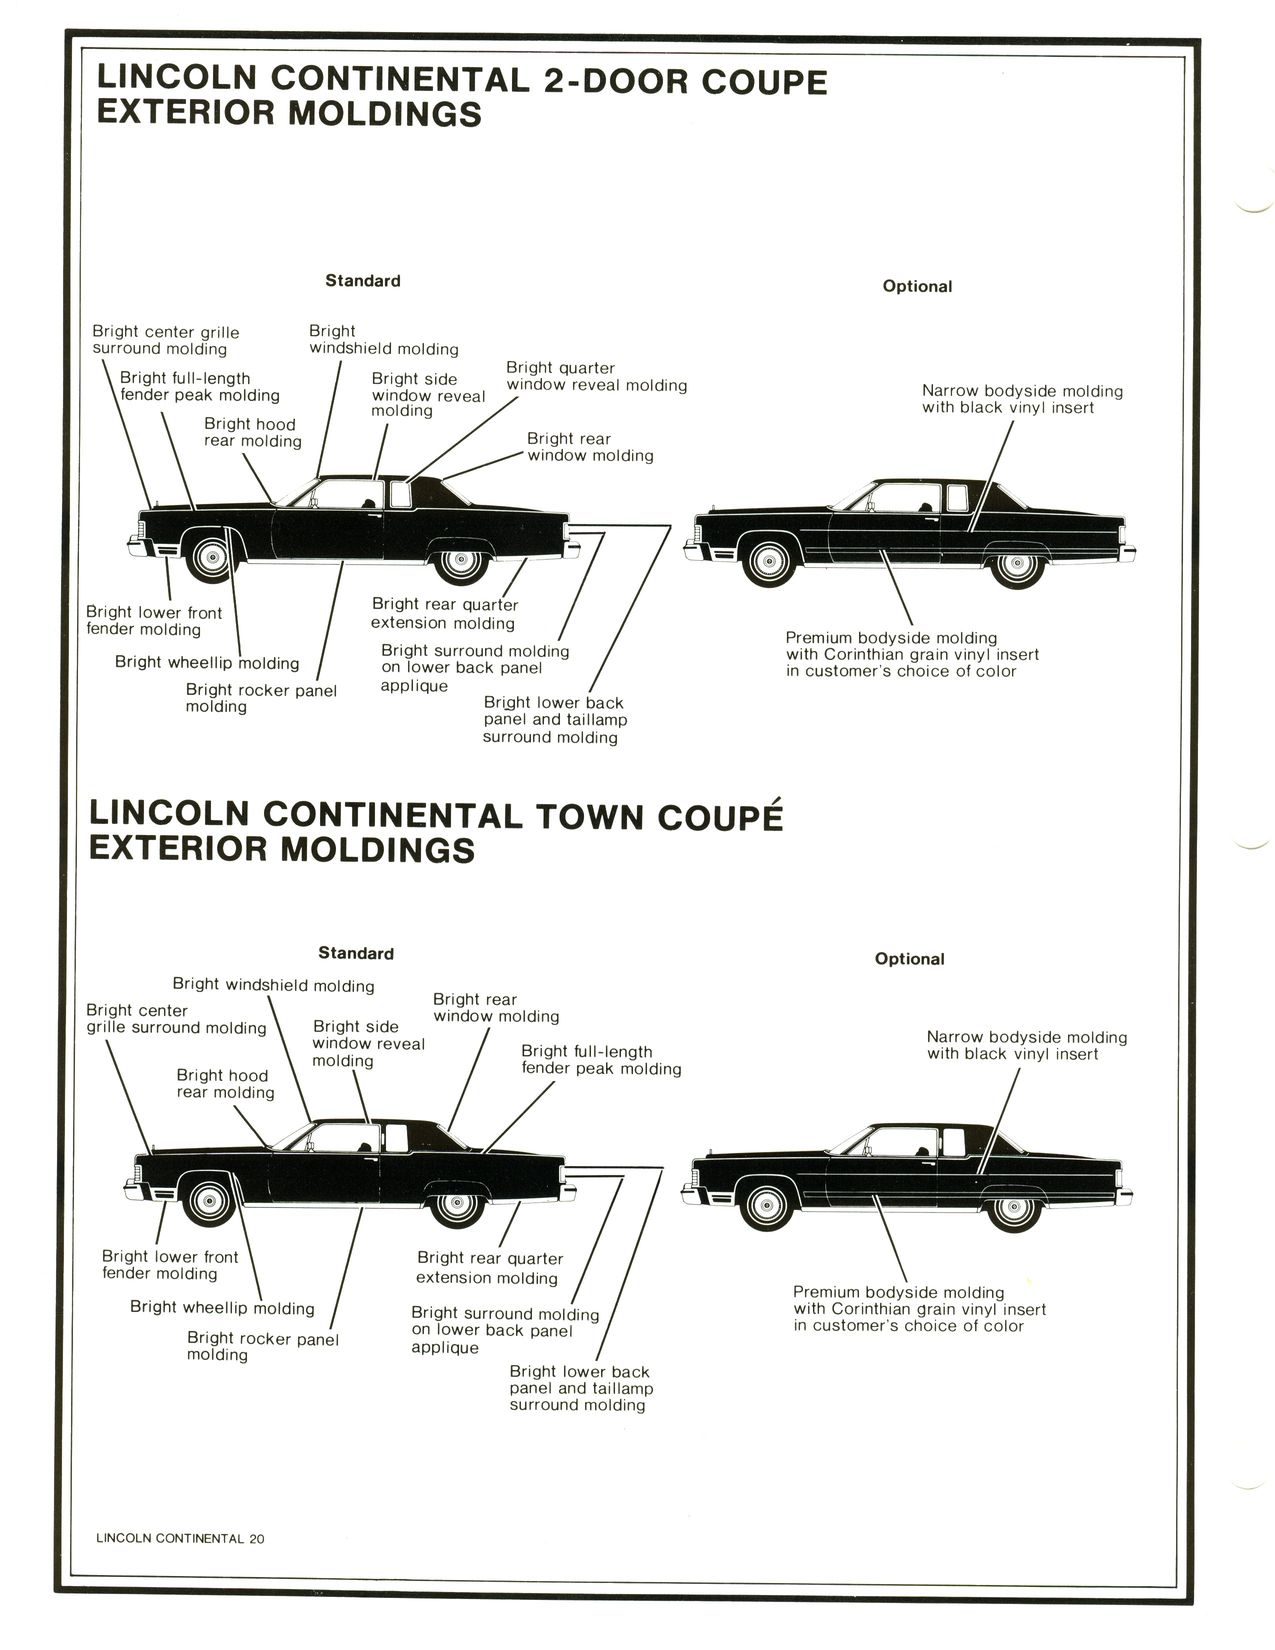 1977_Continental_Product_Facts_Book-2-20